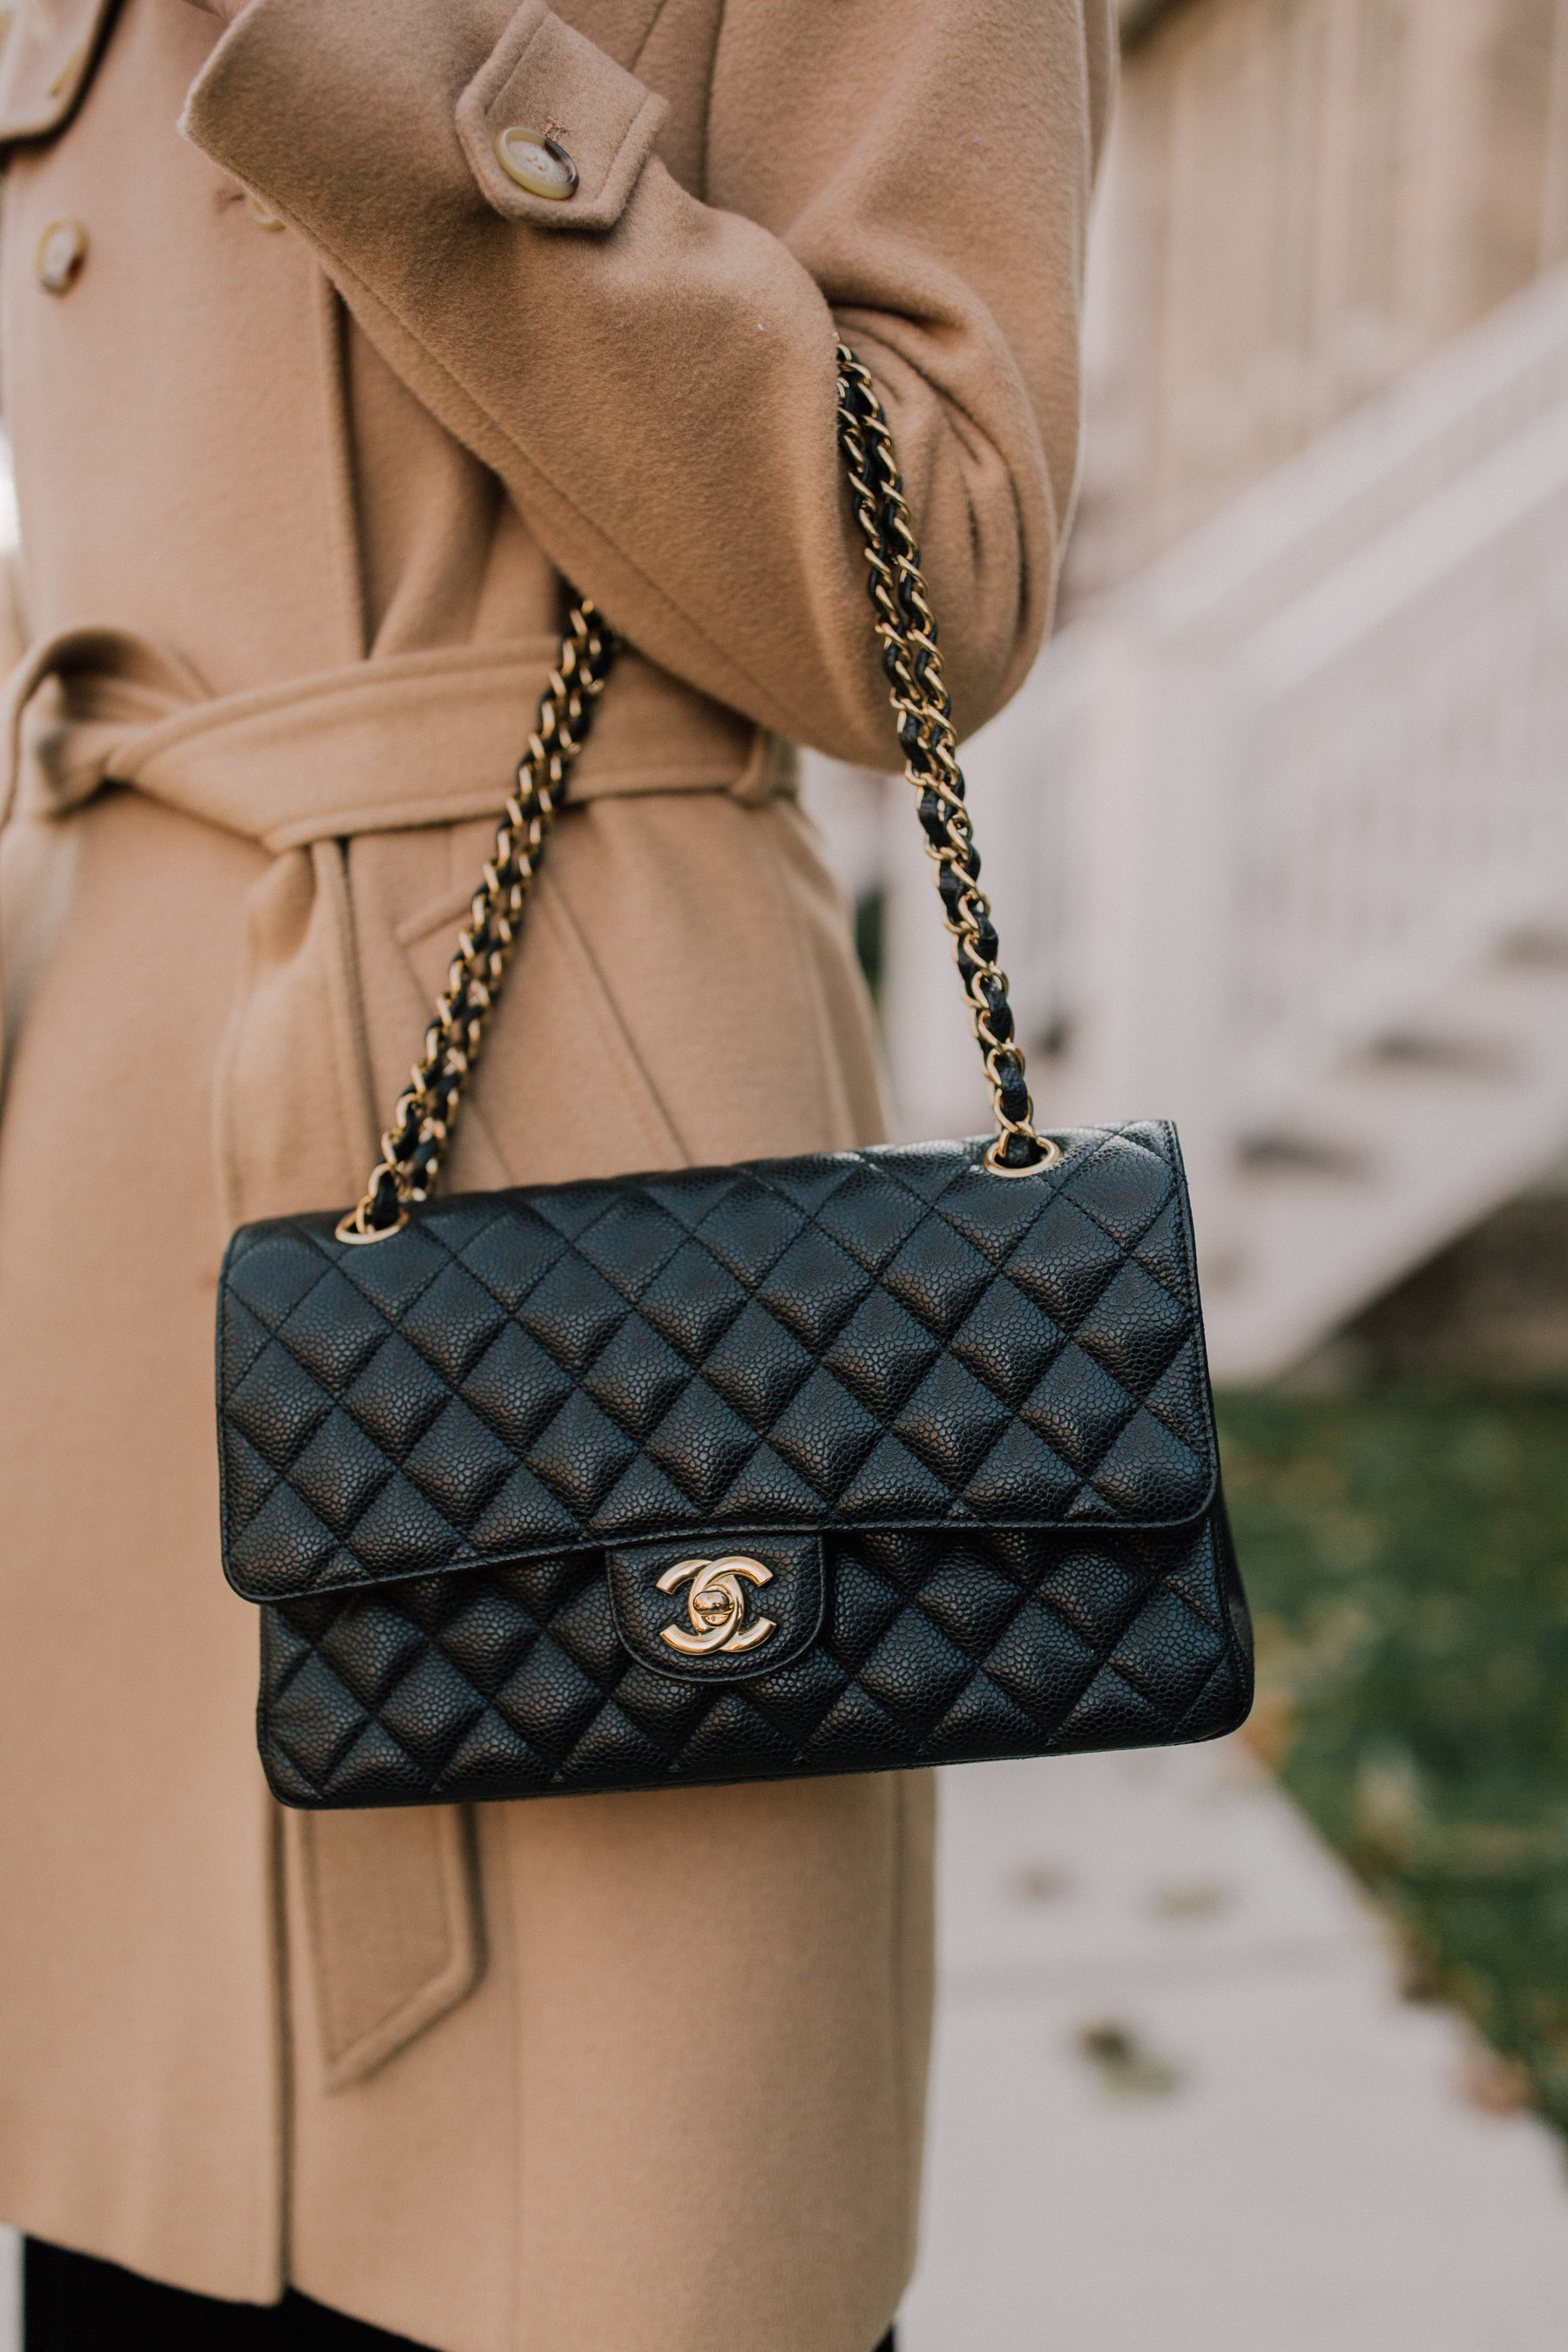 StockX: How to Score Pre-Owned Chanel Bags for Less - Kelly in the City